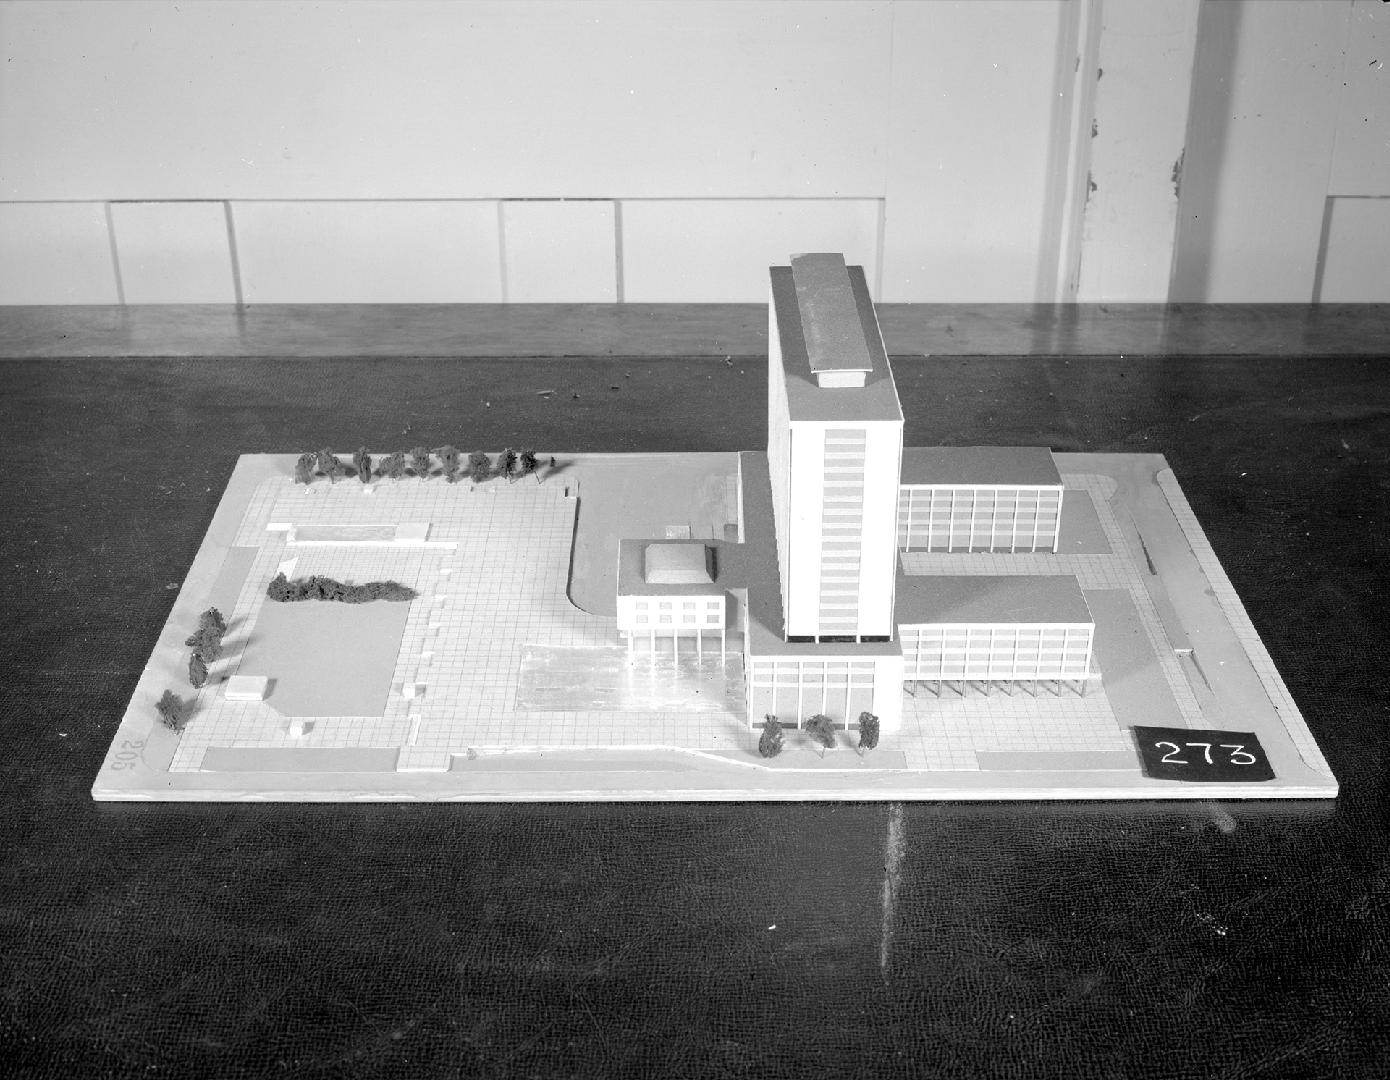 A. Clark, P. Hudson, A. Low and S. Smith entry, City Hall and Square Competition, Toronto, 1958, architectural model